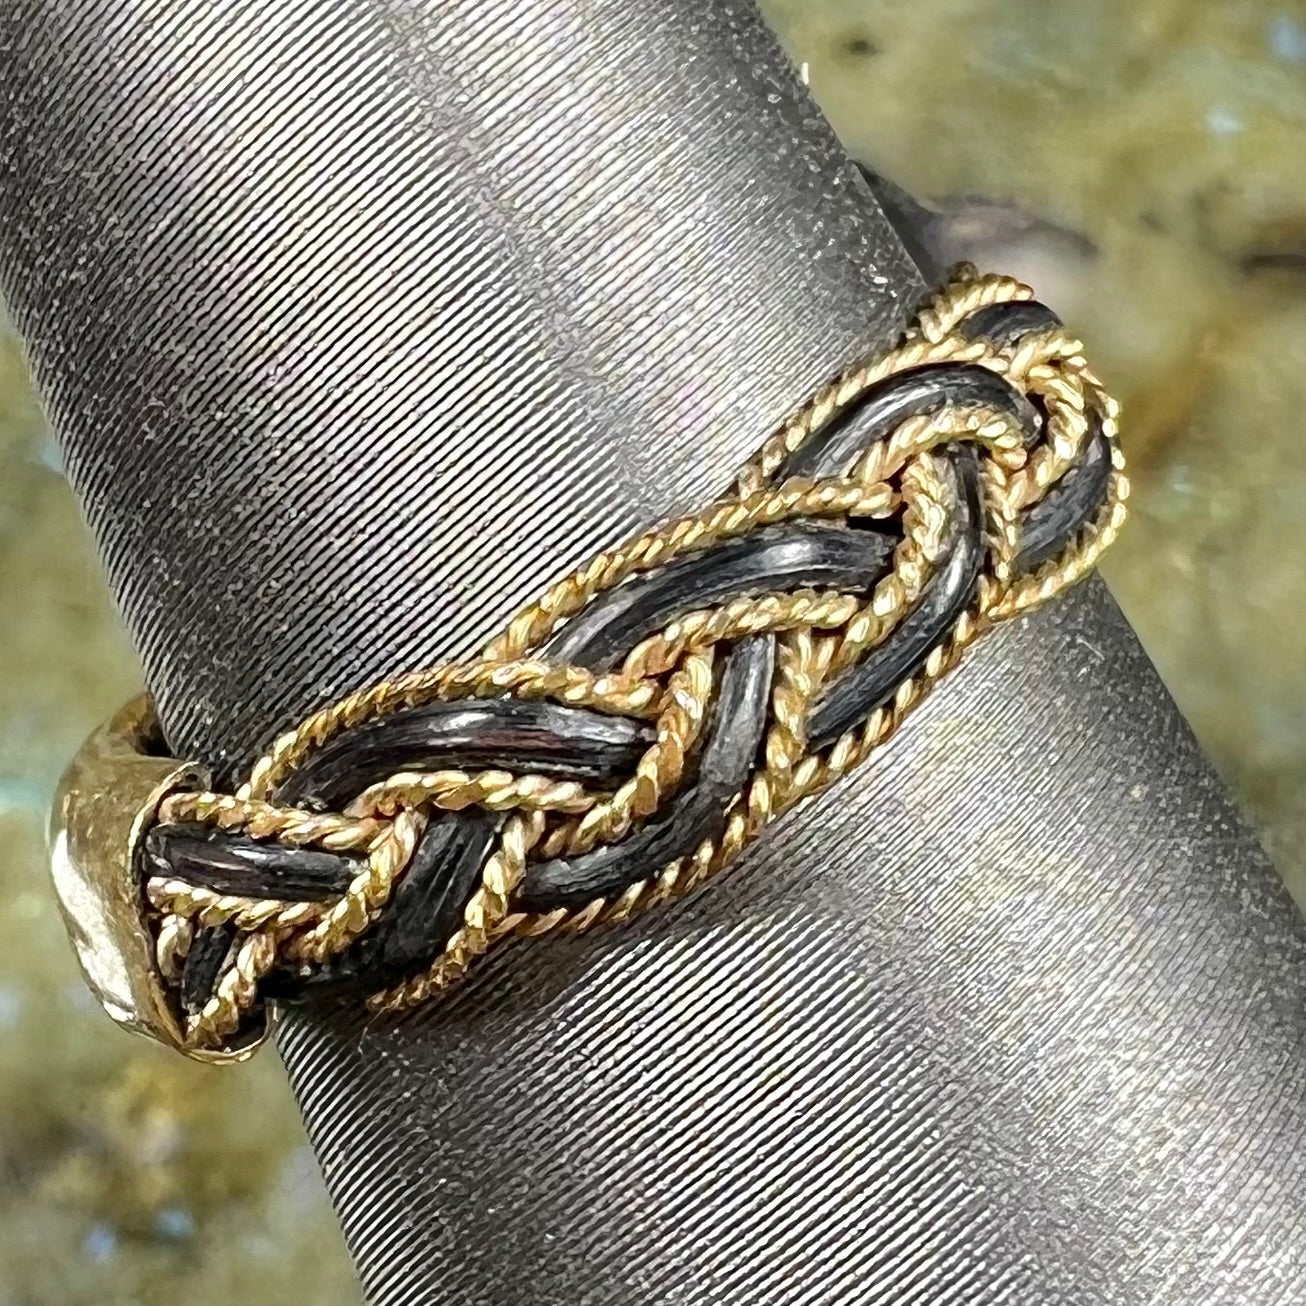 A braided elephant hair gold ring from the Victorian era.